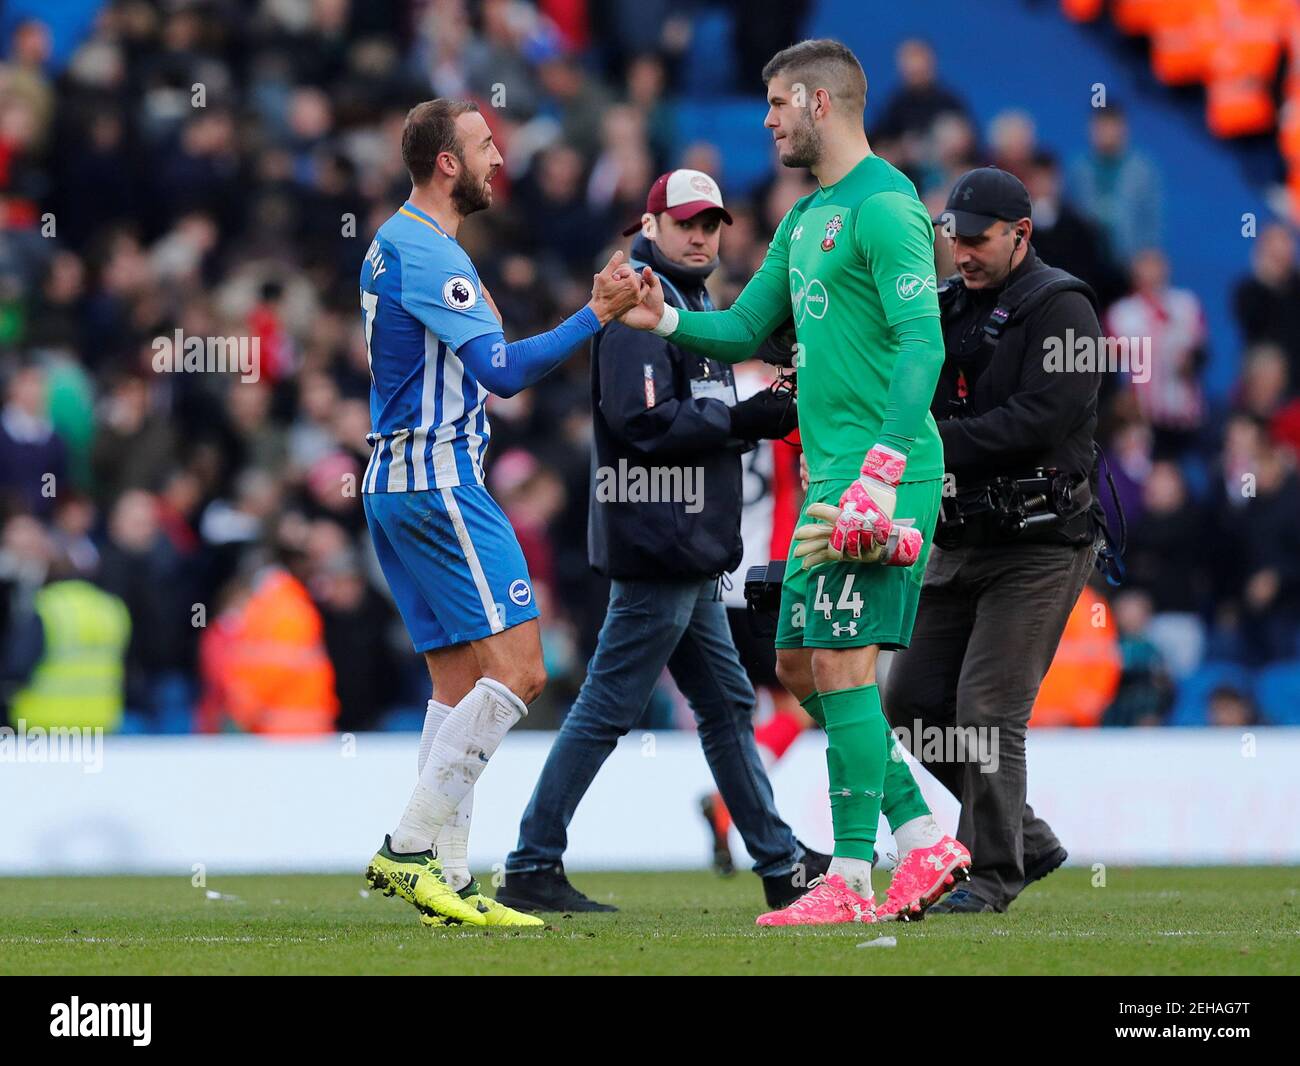 Soccer Football - Premier League - Brighton & Hove Albion vs Southampton - The American Express Community Stadium, Brighton, Britain - October 29, 2017   Brighton's Glenn Murray shkaes hands with Southampton's Fraser Forster after the match   REUTERS/Eddie Keogh    EDITORIAL USE ONLY. No use with unauthorized audio, video, data, fixture lists, club/league logos or 'live' services. Online in-match use limited to 75 images, no video emulation. No use in betting, games or single club/league/player publications. Please contact your account representative for further details. Stock Photo